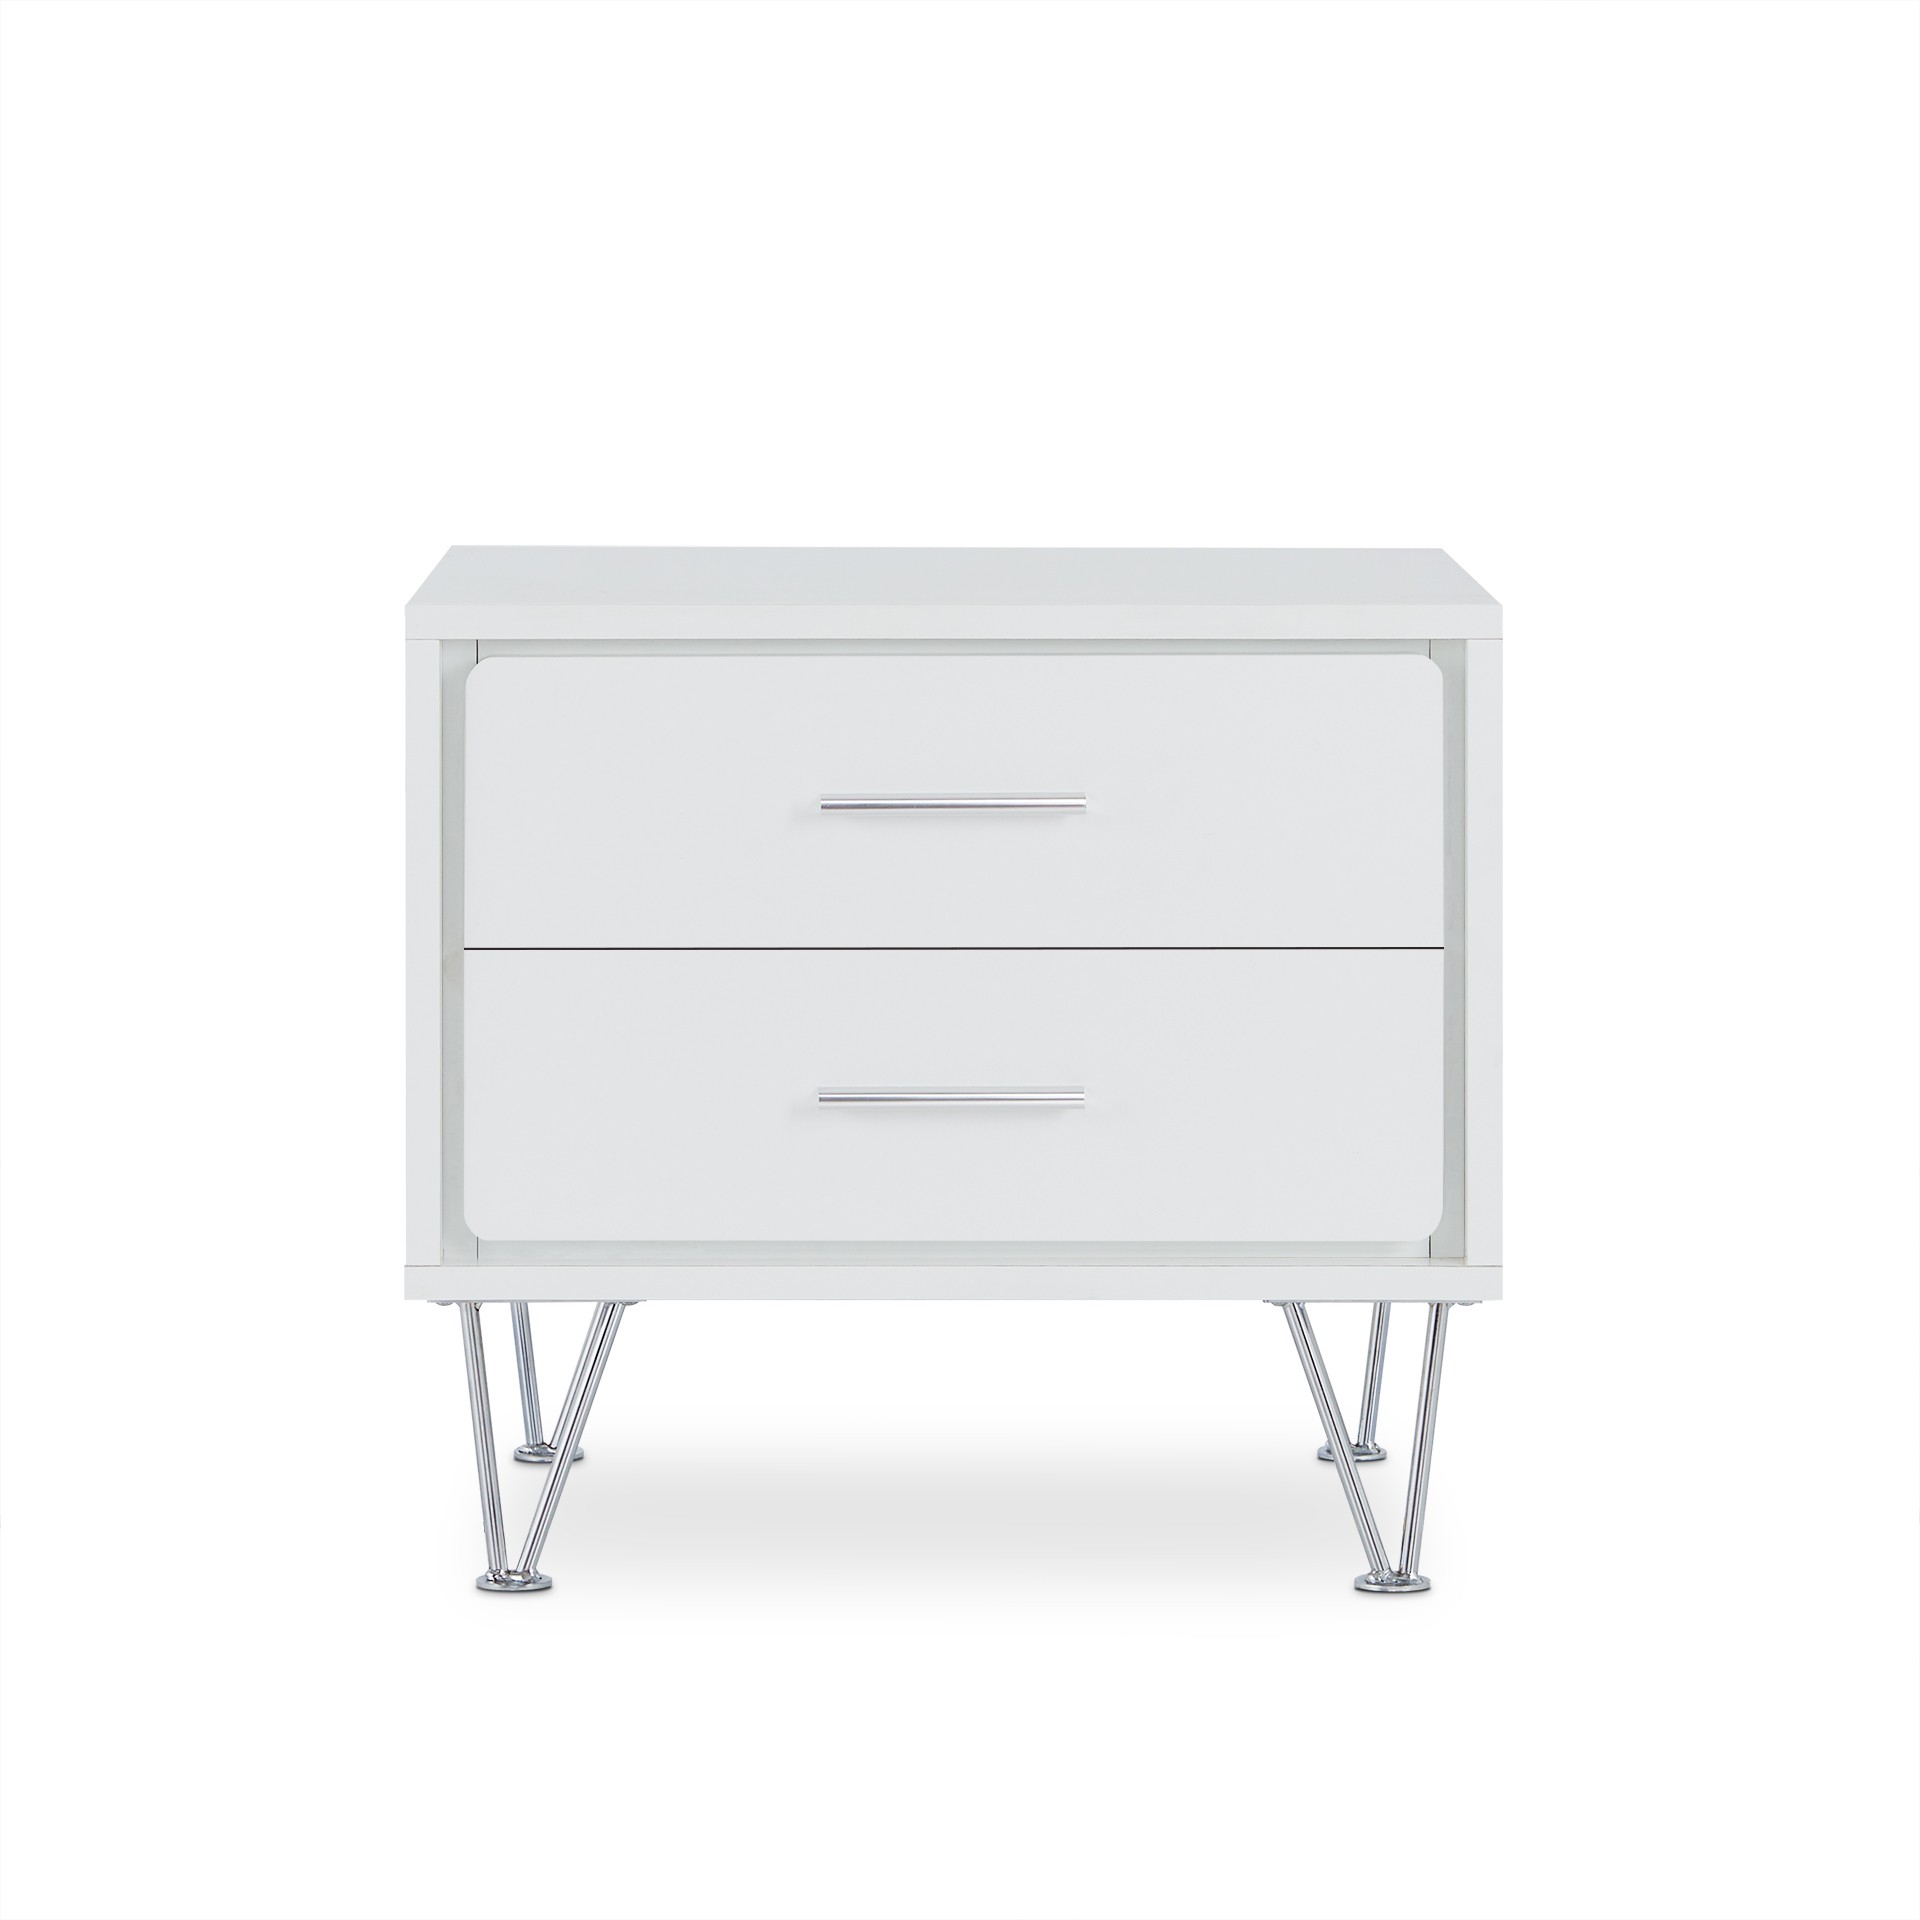 19.69" X 15.75" X 17.93" White Particle Board Nightstand